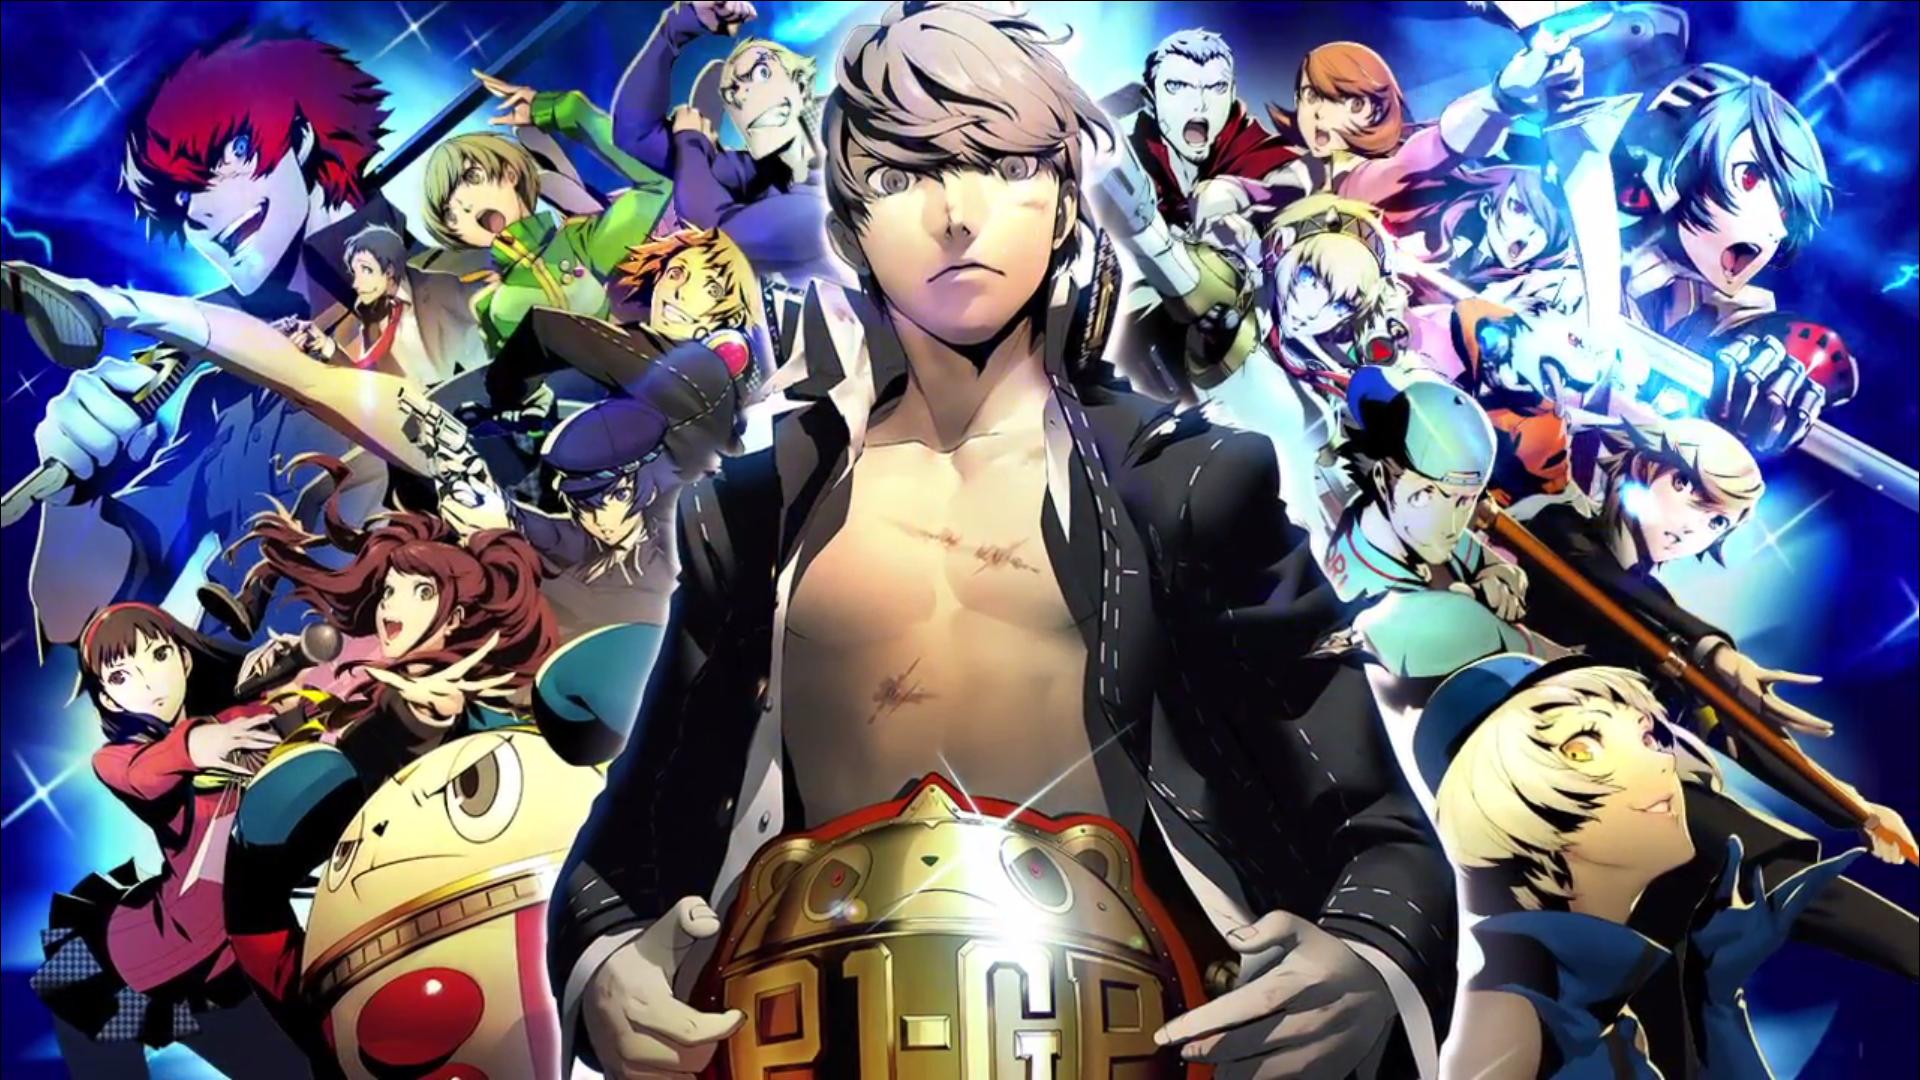 Persona 4 Arena Ultimax is coming Fall 2014 to the